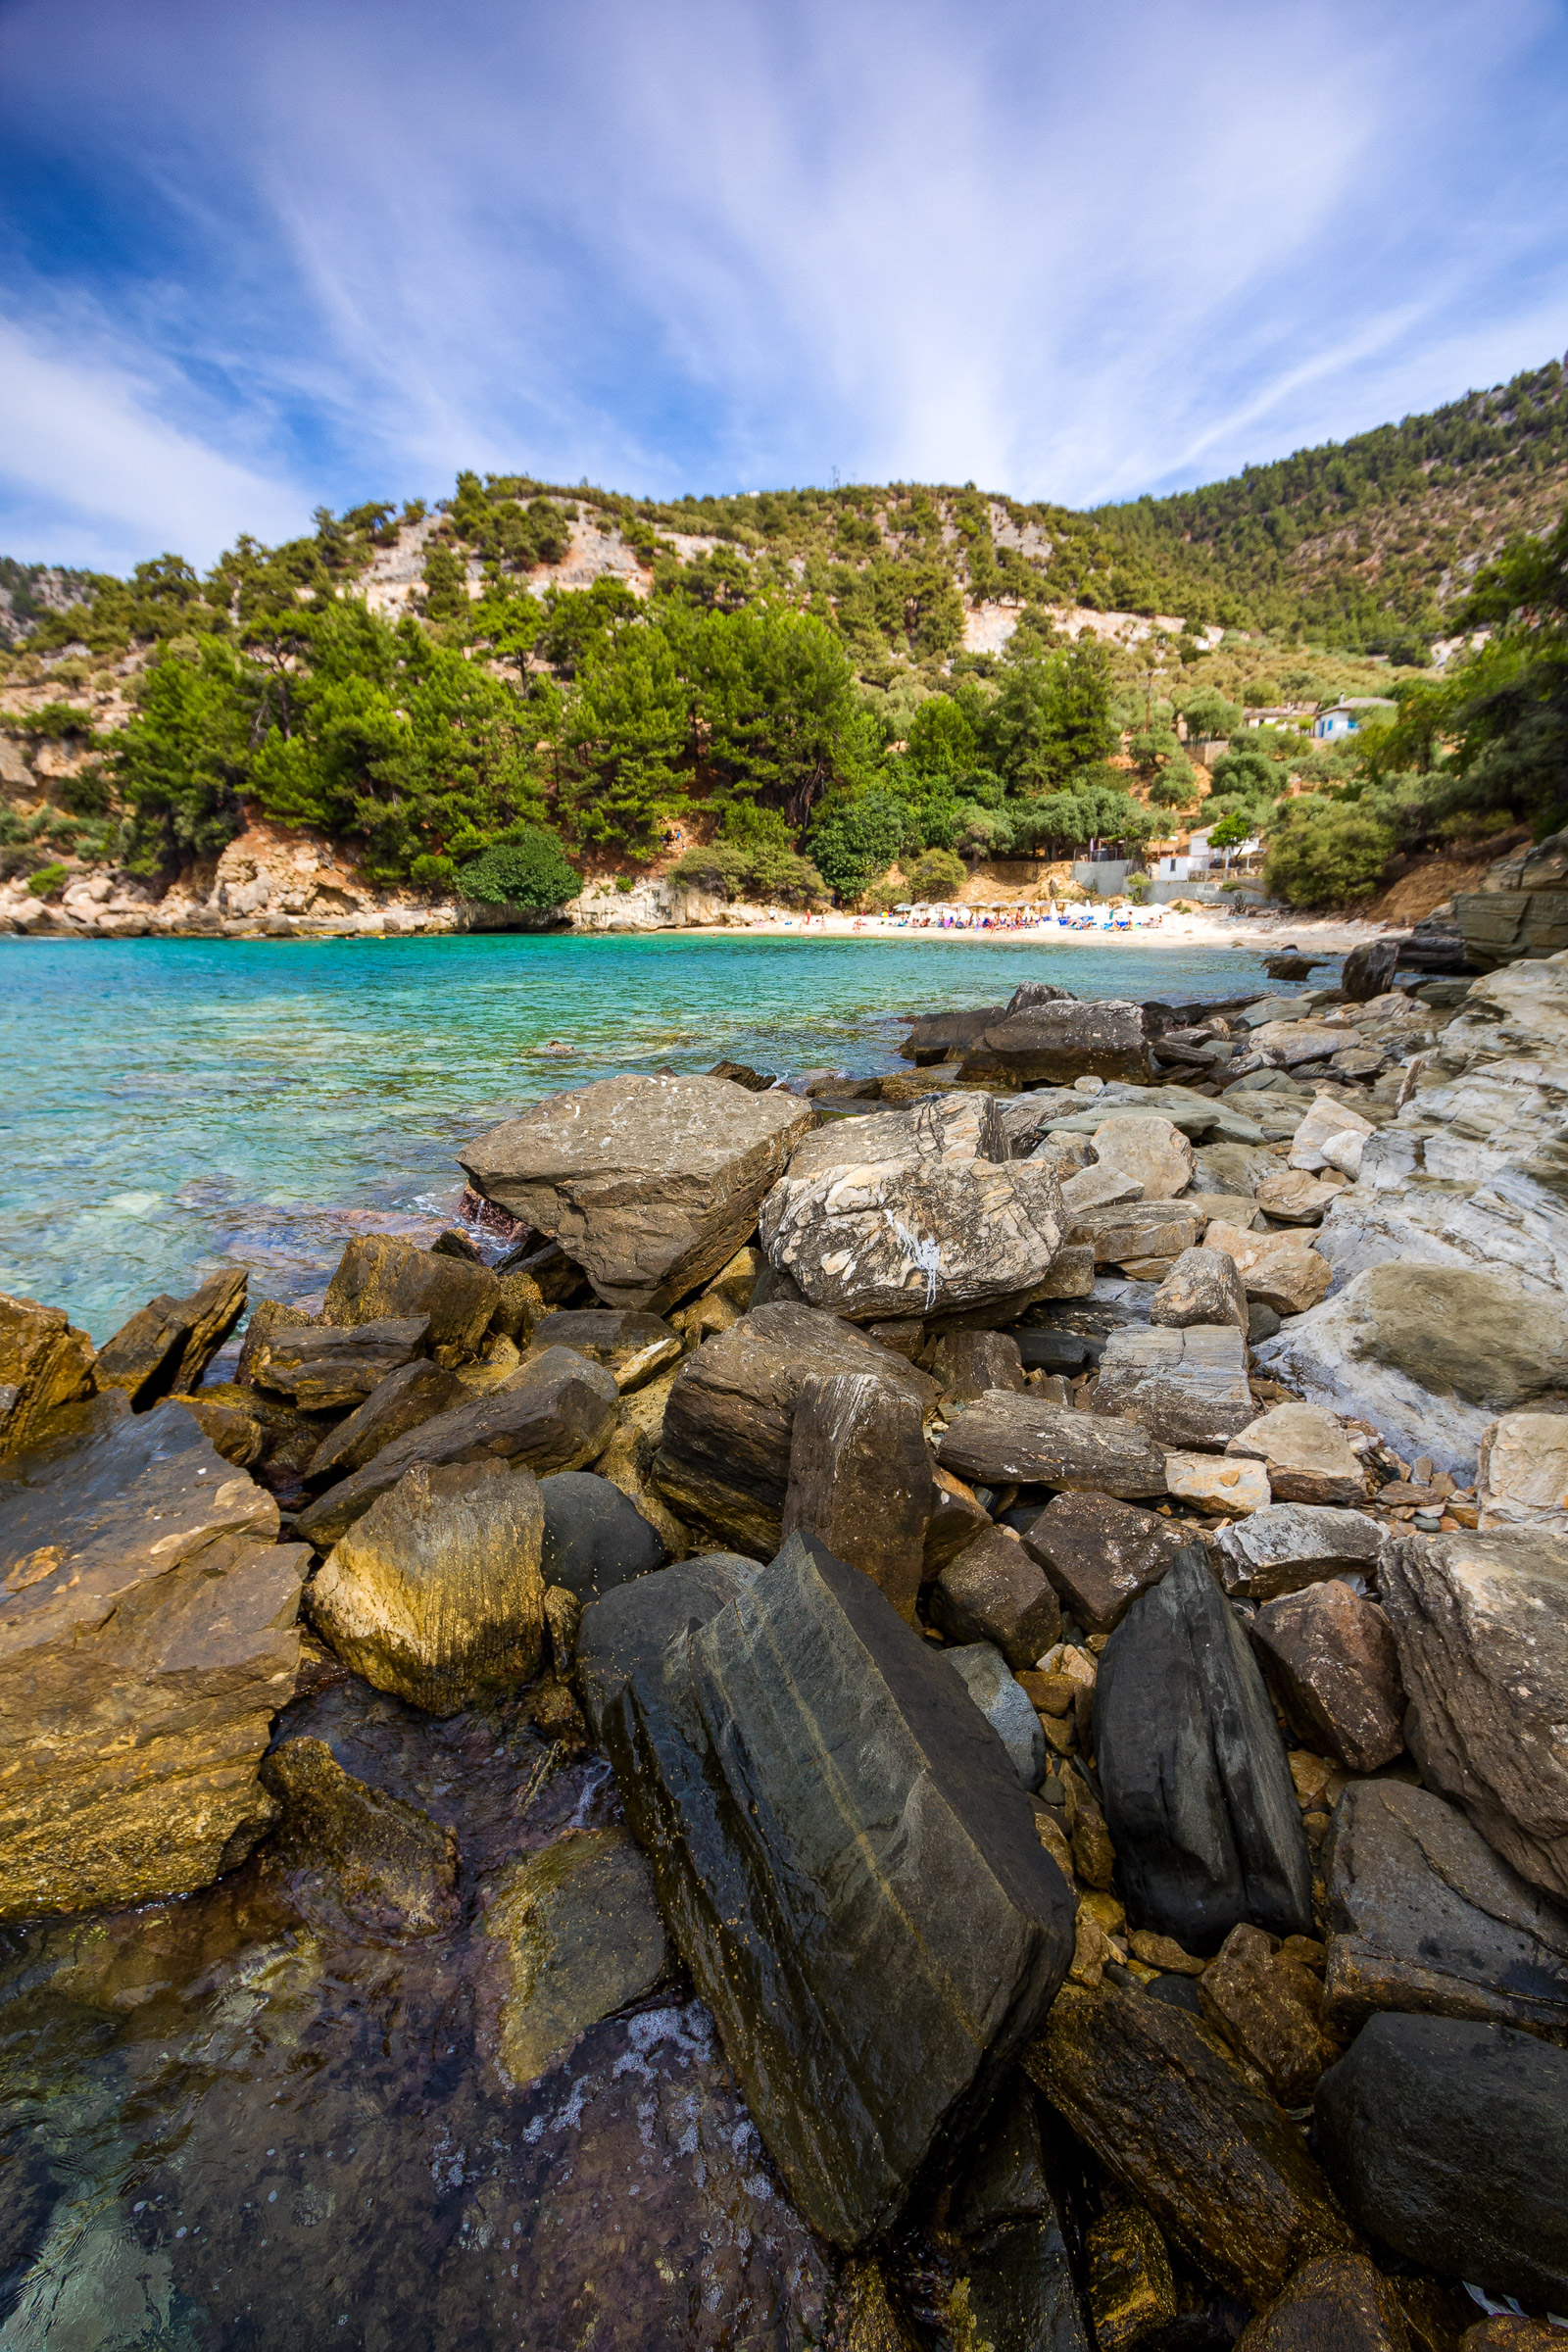 Big boulders on the shore of a Greek island